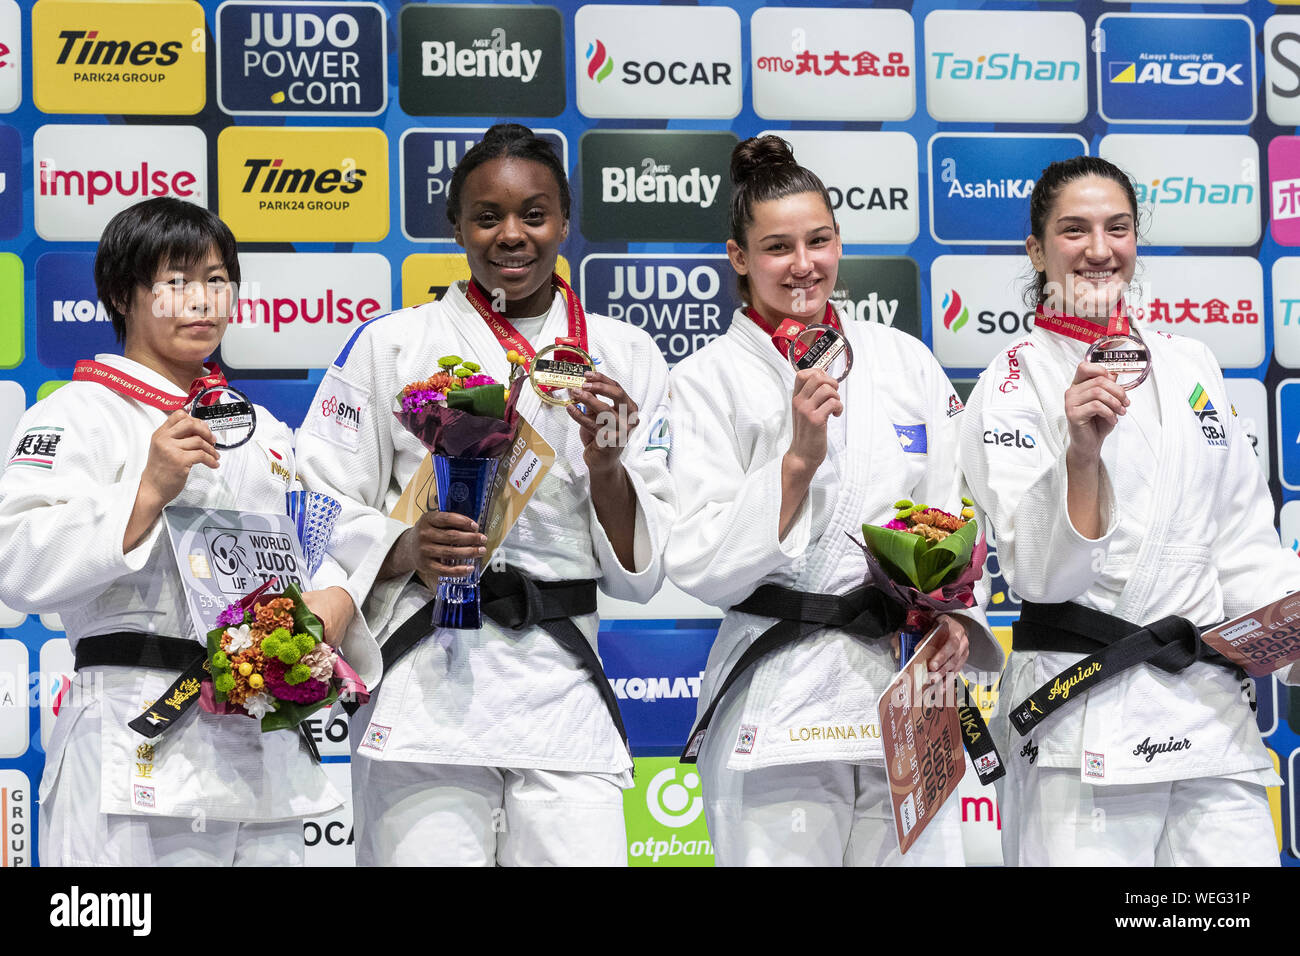 Tokyo, Japan. 30th Aug, 2019. (L to R) Silver medalist Shori Hamada of Japan, gold medalist Madeleine Malonga of France, bronze medalists Loriana Kuka of Kosovo and Mayra Aguiar of Brazil, pose for the cameras during the award ceremony of the women's -78kg category at World Judo Championships Tokyo 2019 in the Nippon Budokan. The World Judo Championships Tokyo 2019 is held from August 25 to September 1st. Credit: Rodrigo Reyes Marin/ZUMA Wire/Alamy Live News Stock Photo